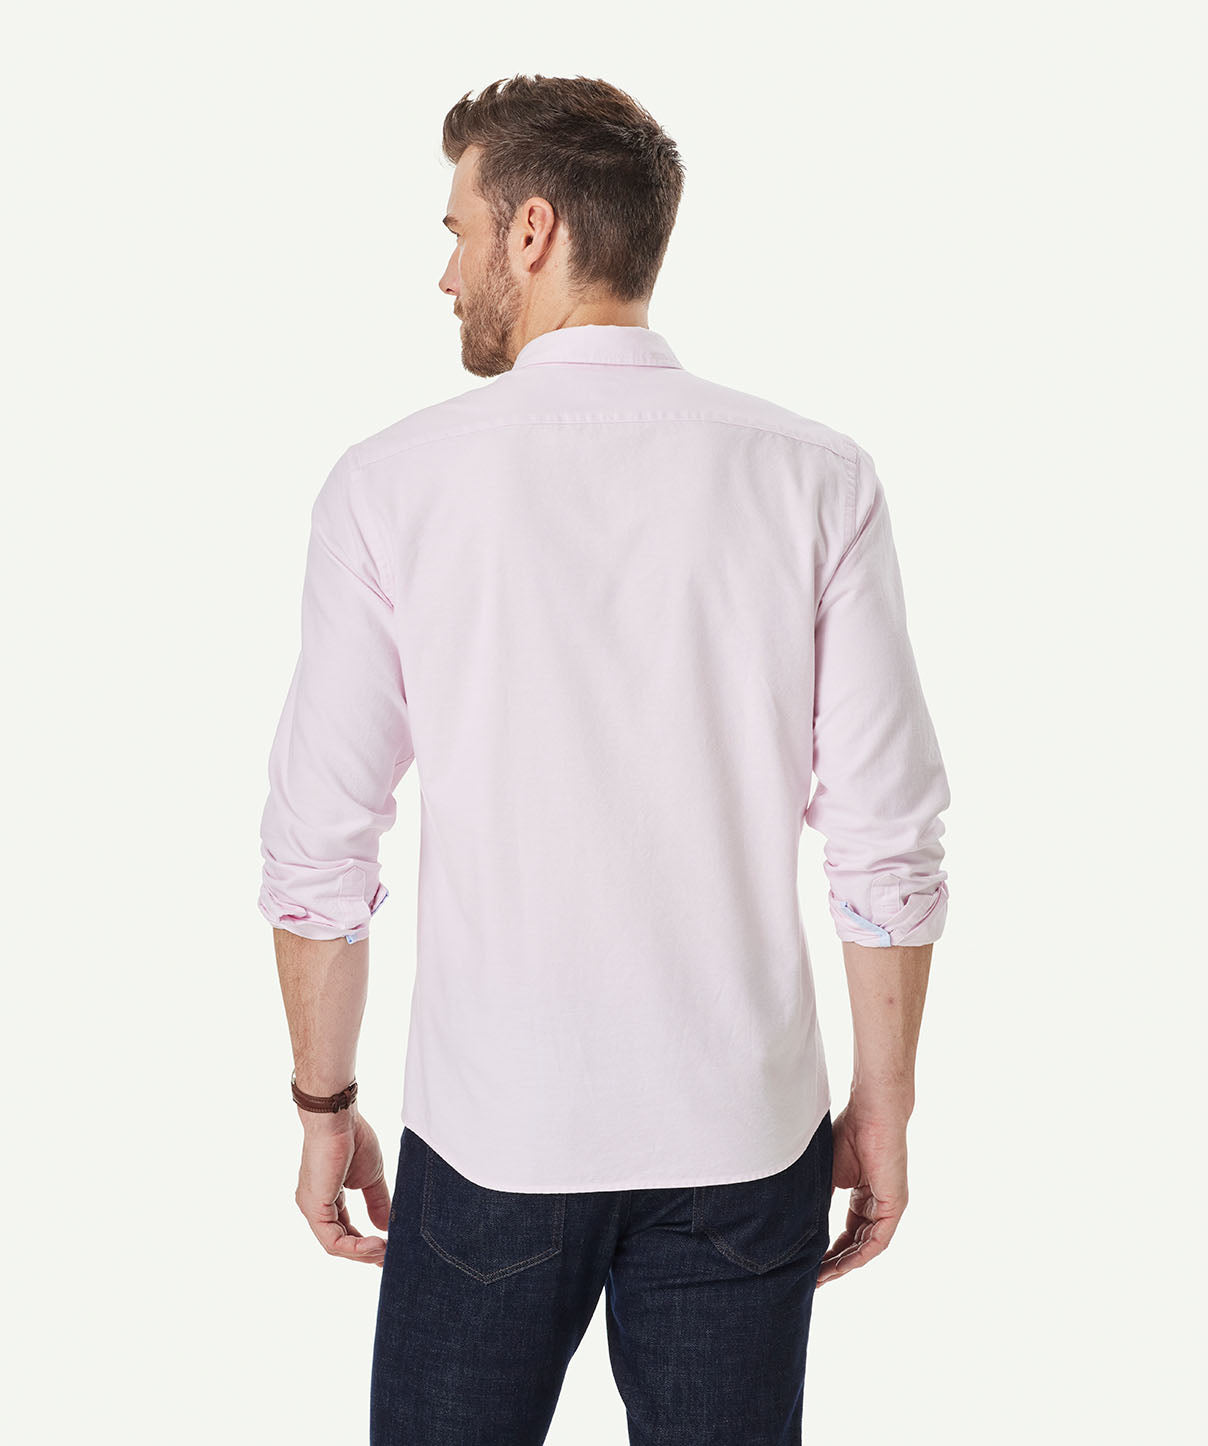 Tailored Plain Casual Oxford Long Sleeve Shirt - Pale Pink - Long ...